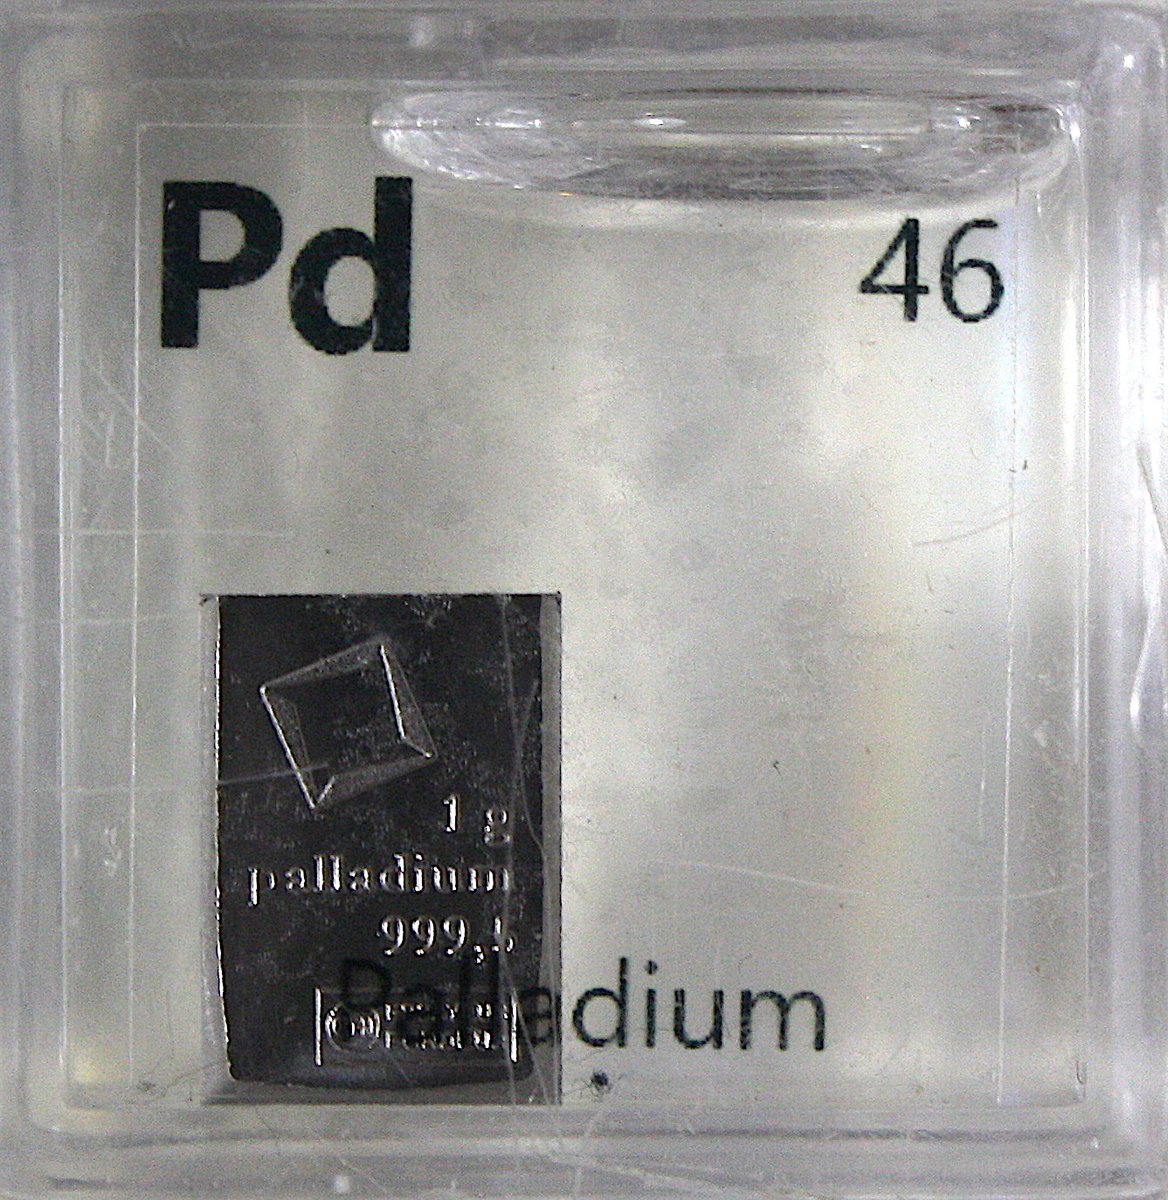 Palladium  #elementphotos. Red compound is potassium palladium chloride (K2PdCl4). The value of Pd has soared past the traditionally more expensive Pt in recent years due to its use in catalytic converters.